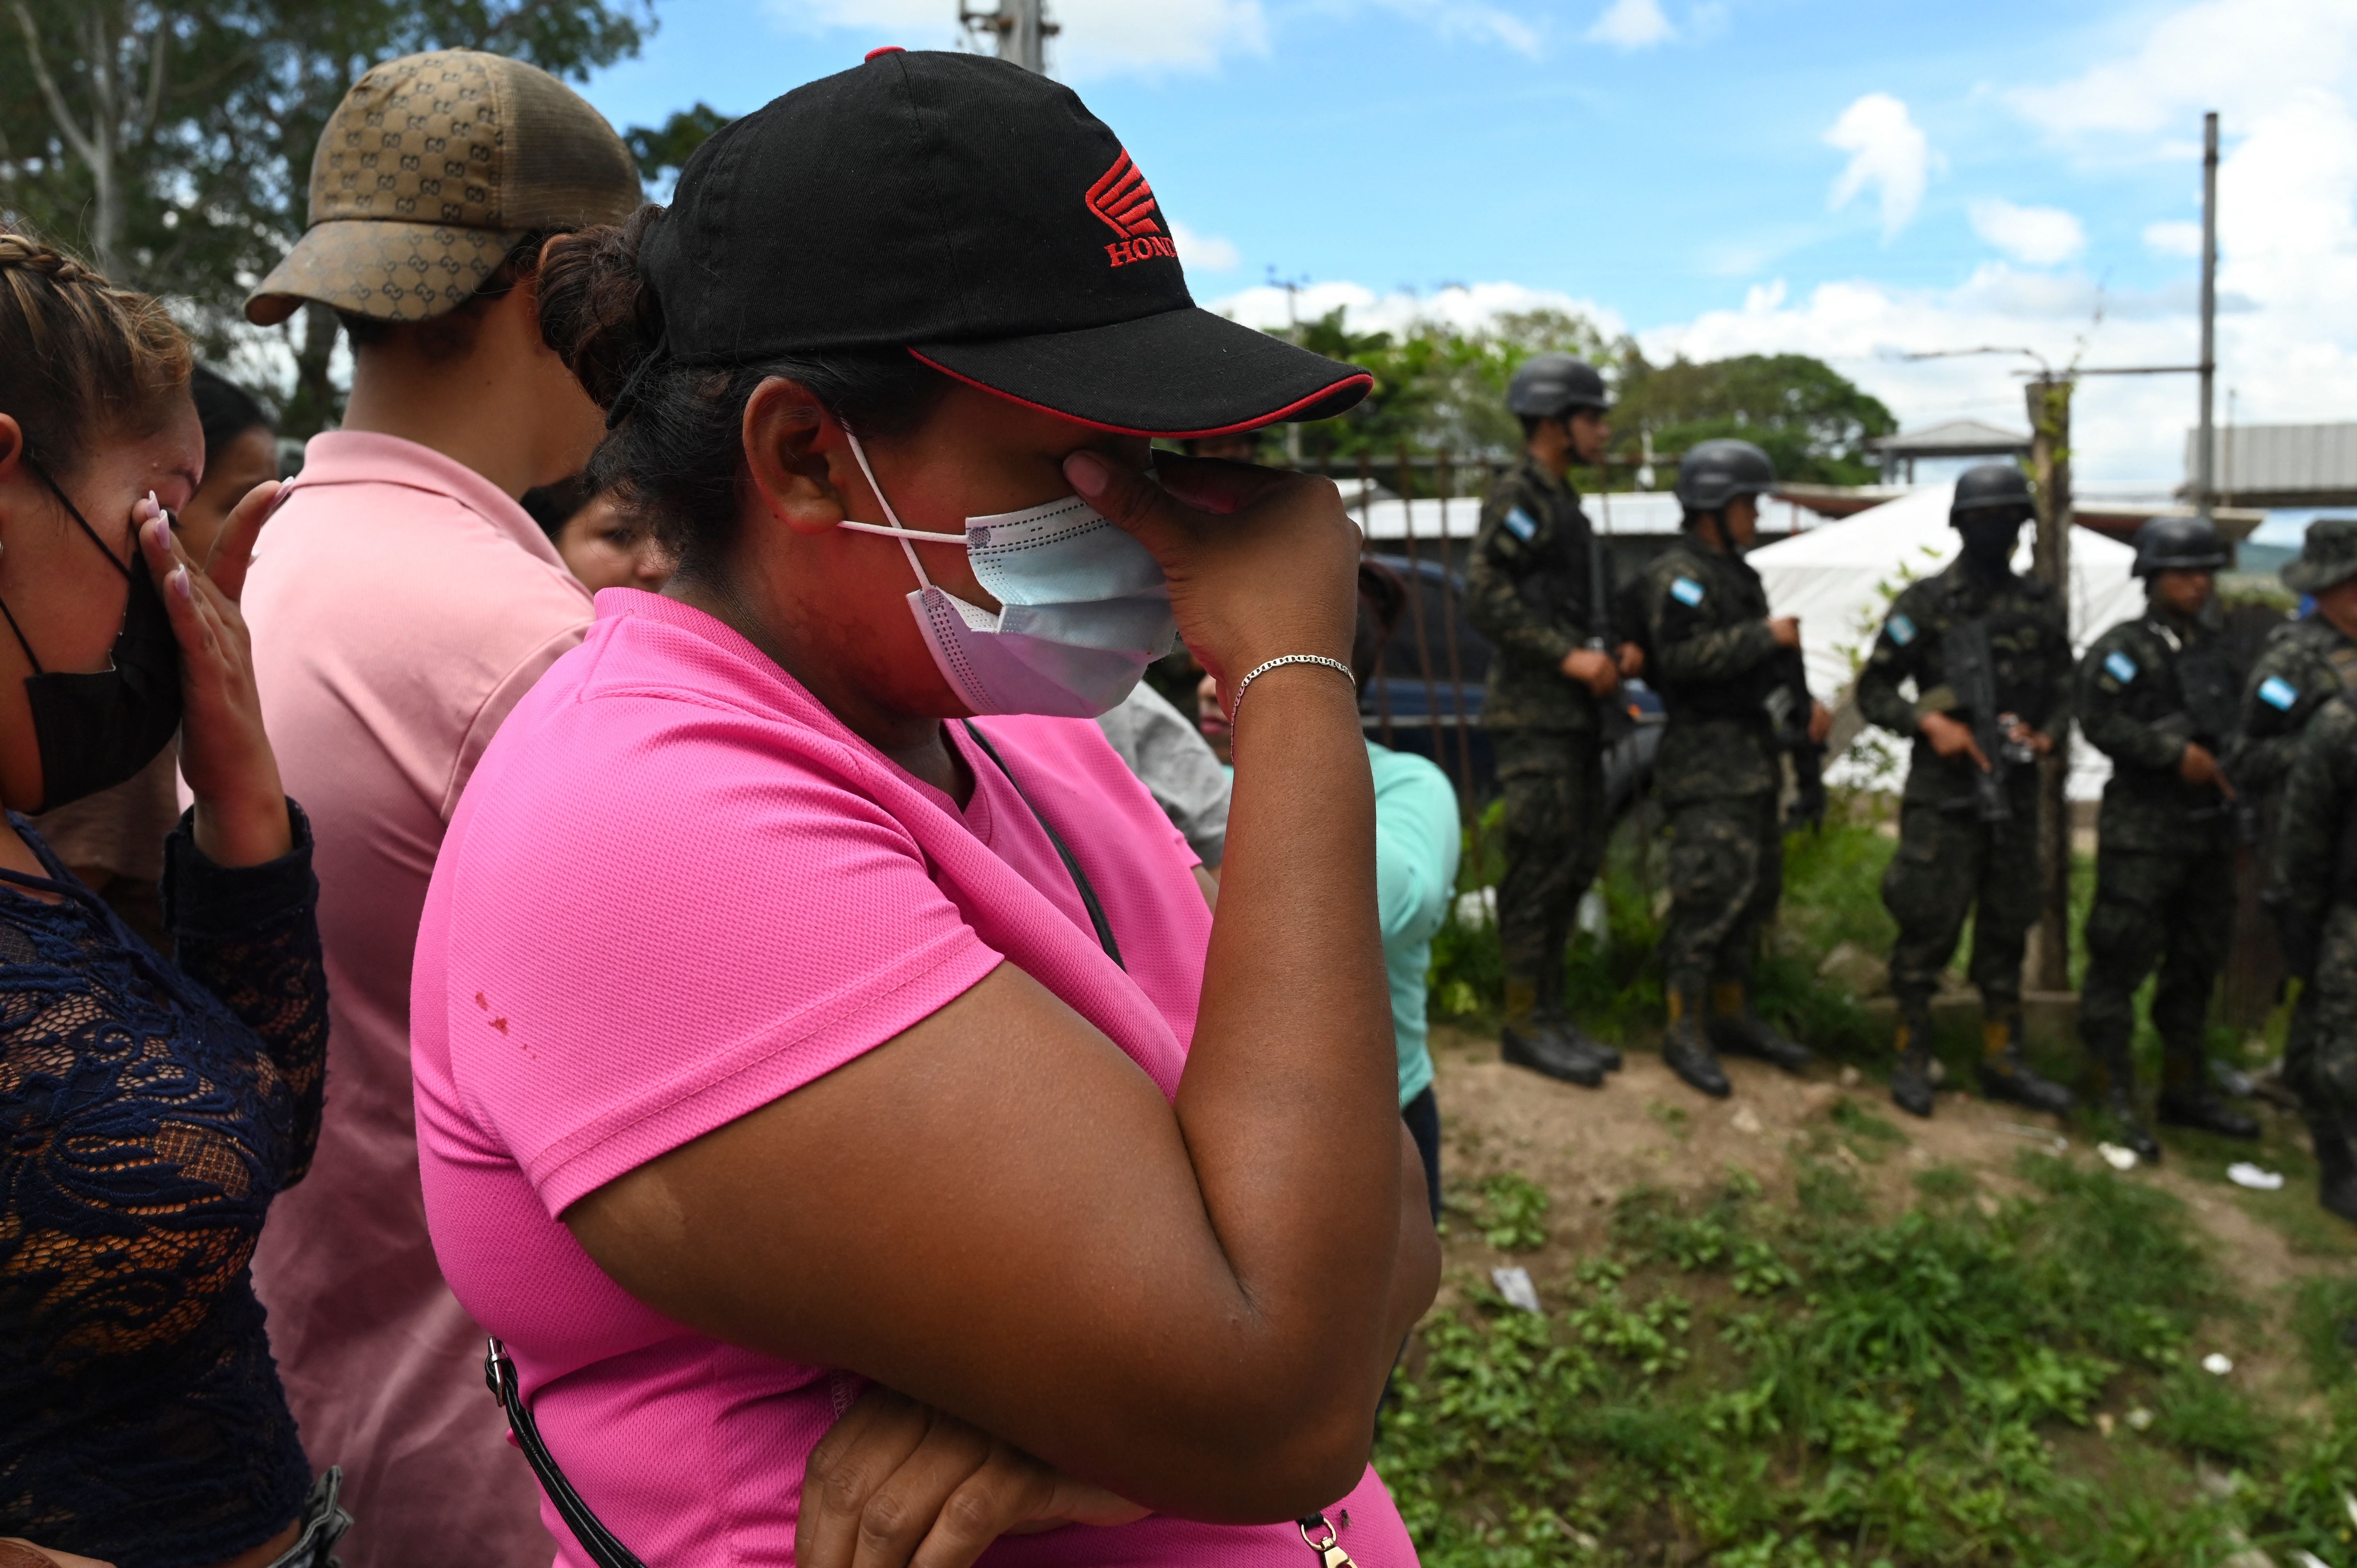 41 dead following riot at women's prison in Honduras | The Independent